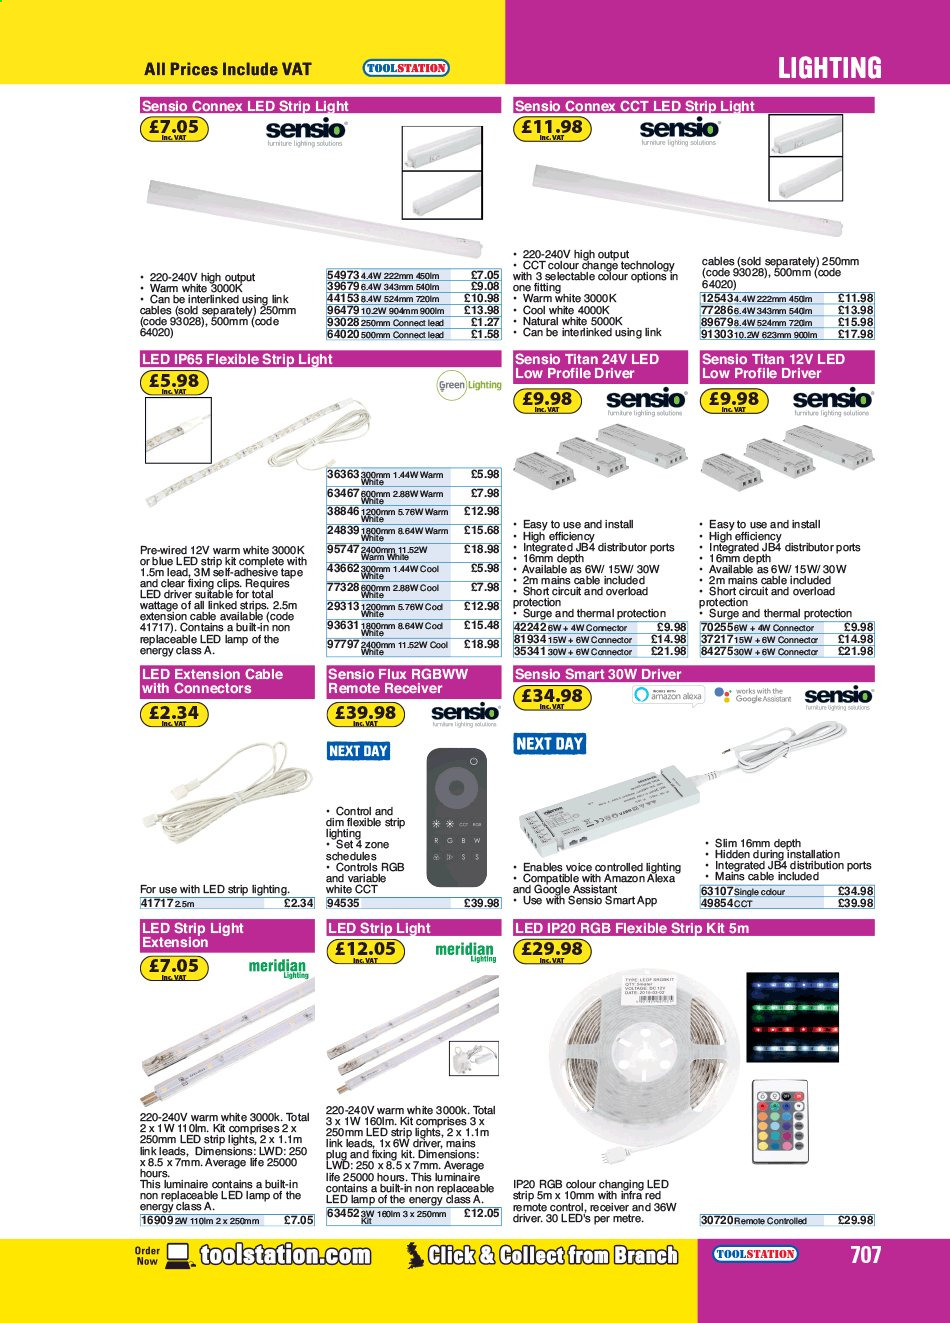 Toolstation offer . Page 707.